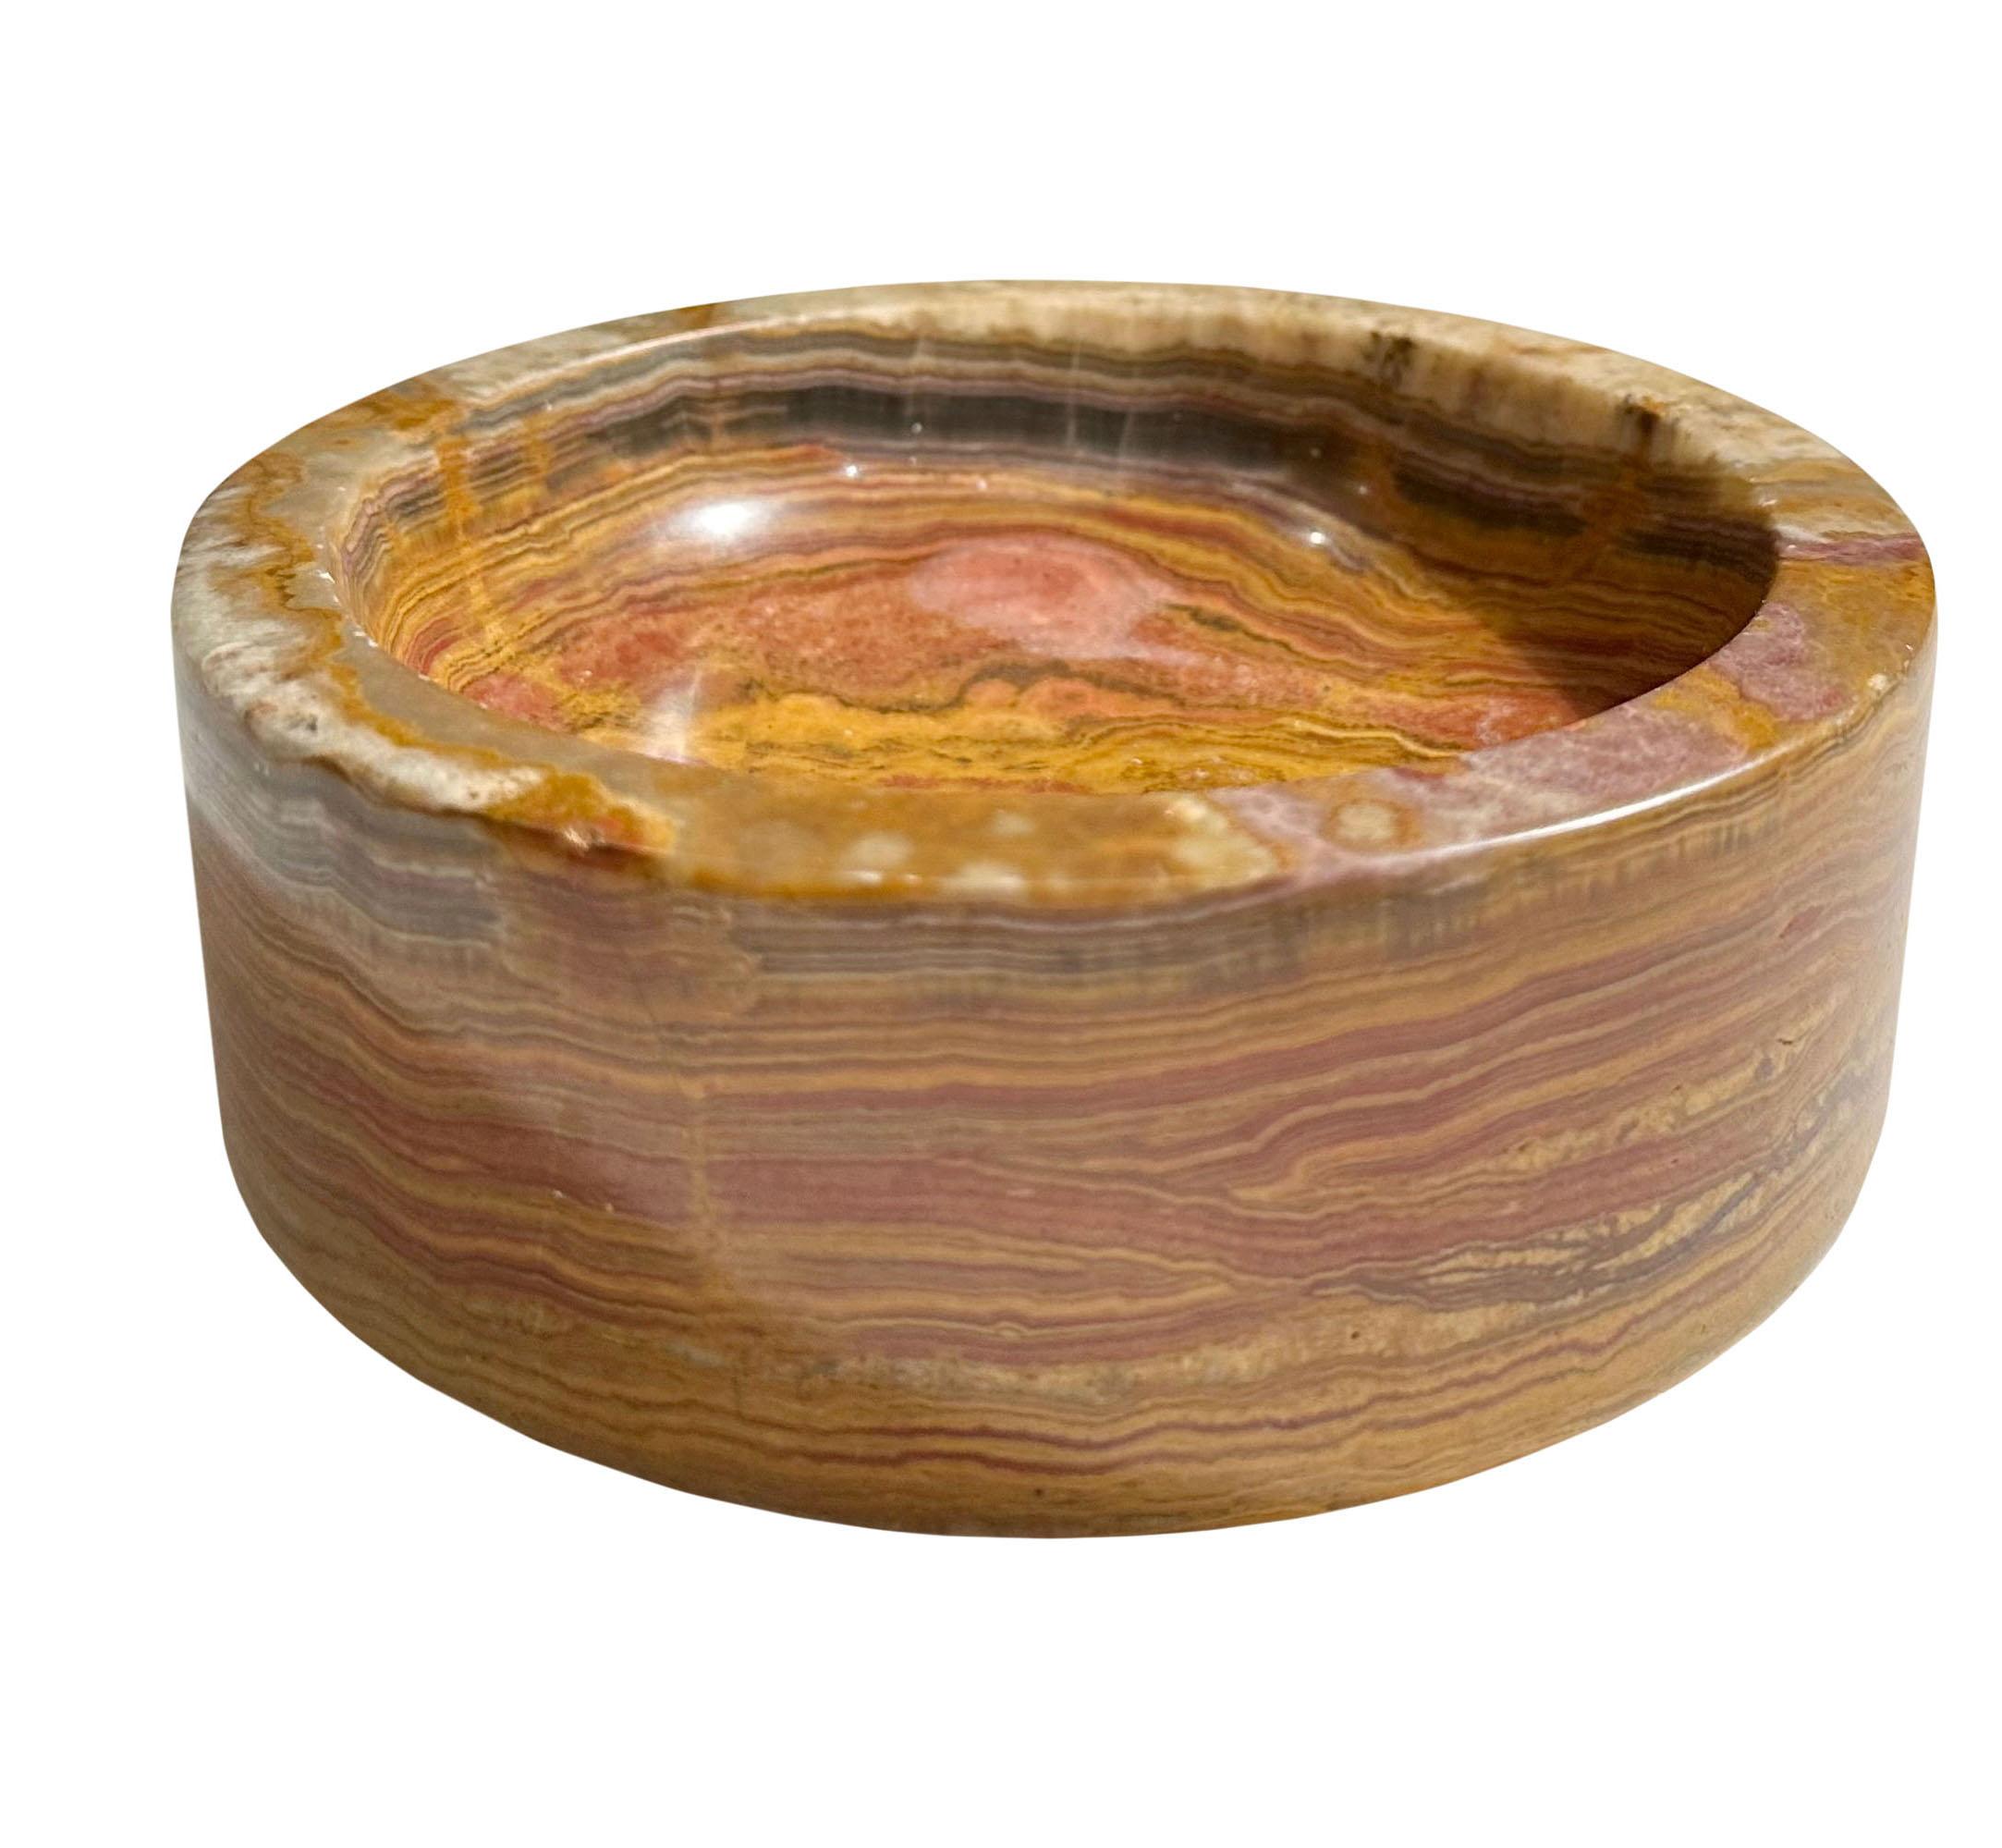 A small but heavy reddish brown amber swirl bowl made of Onyx. Italy, circa 1950s.
